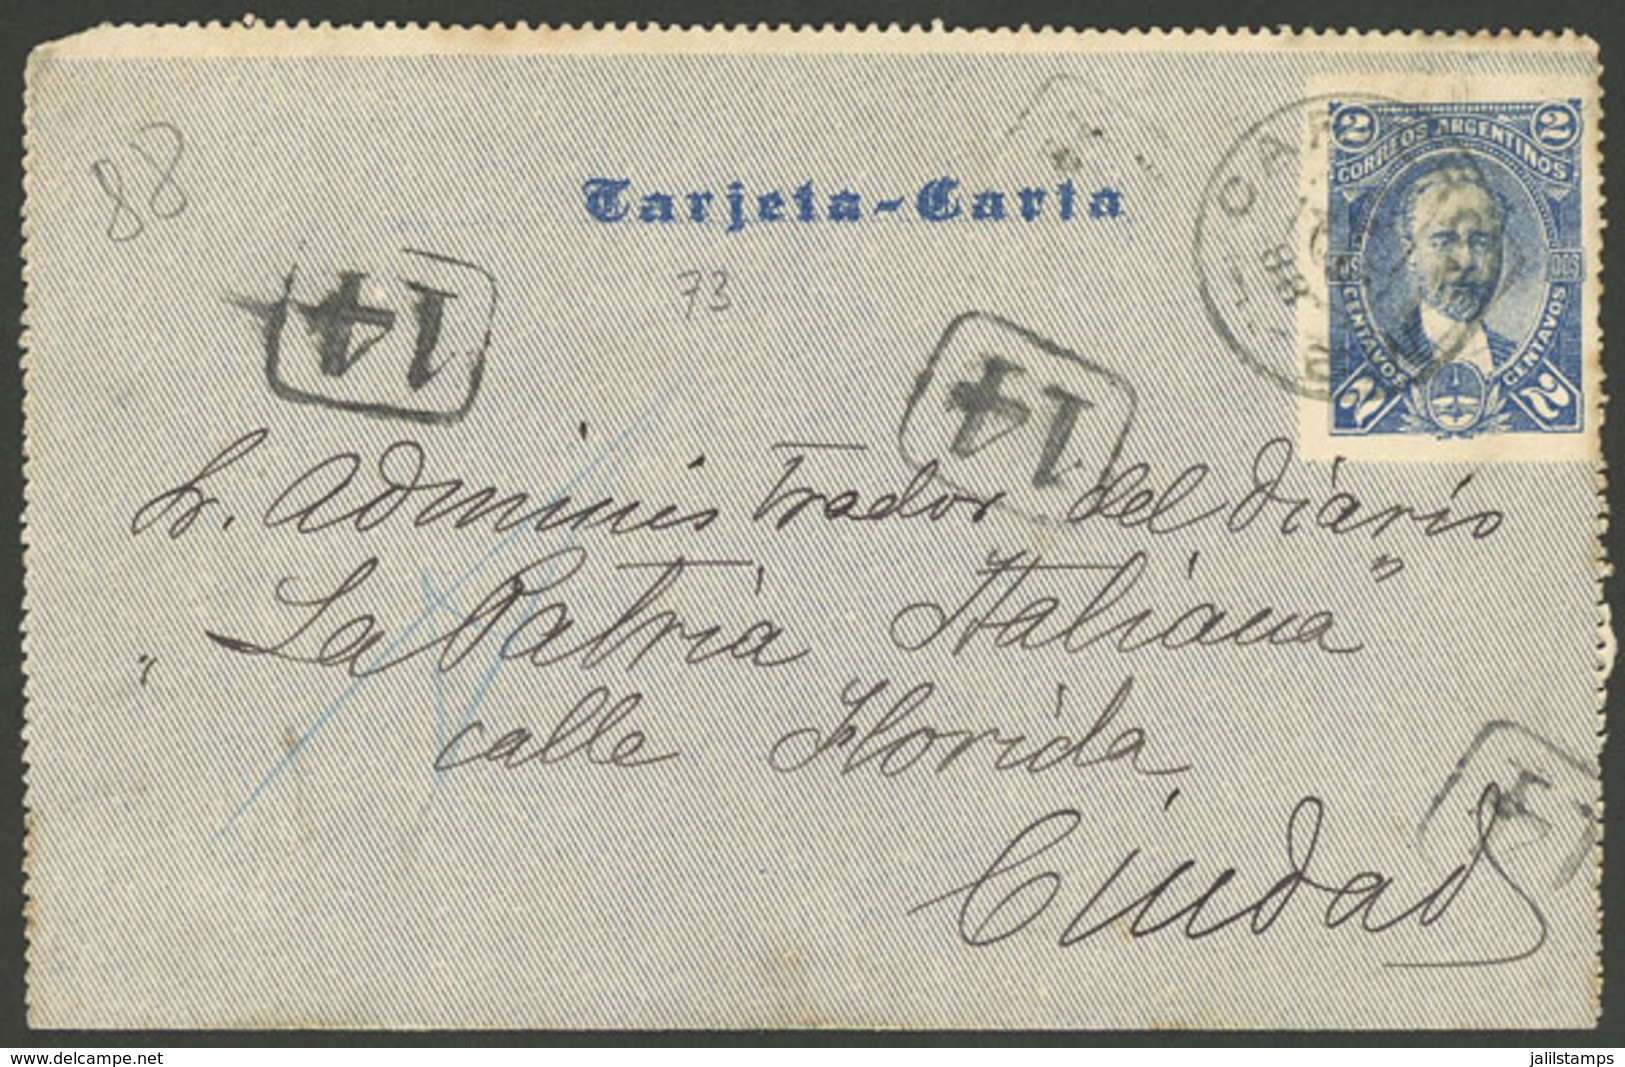 ARGENTINA: Kidd 2c. Lettercard Used In Buenos Aires On 4/AU/1888, Interesting "Buzón 14" Marks, VF Quality" - Briefe U. Dokumente